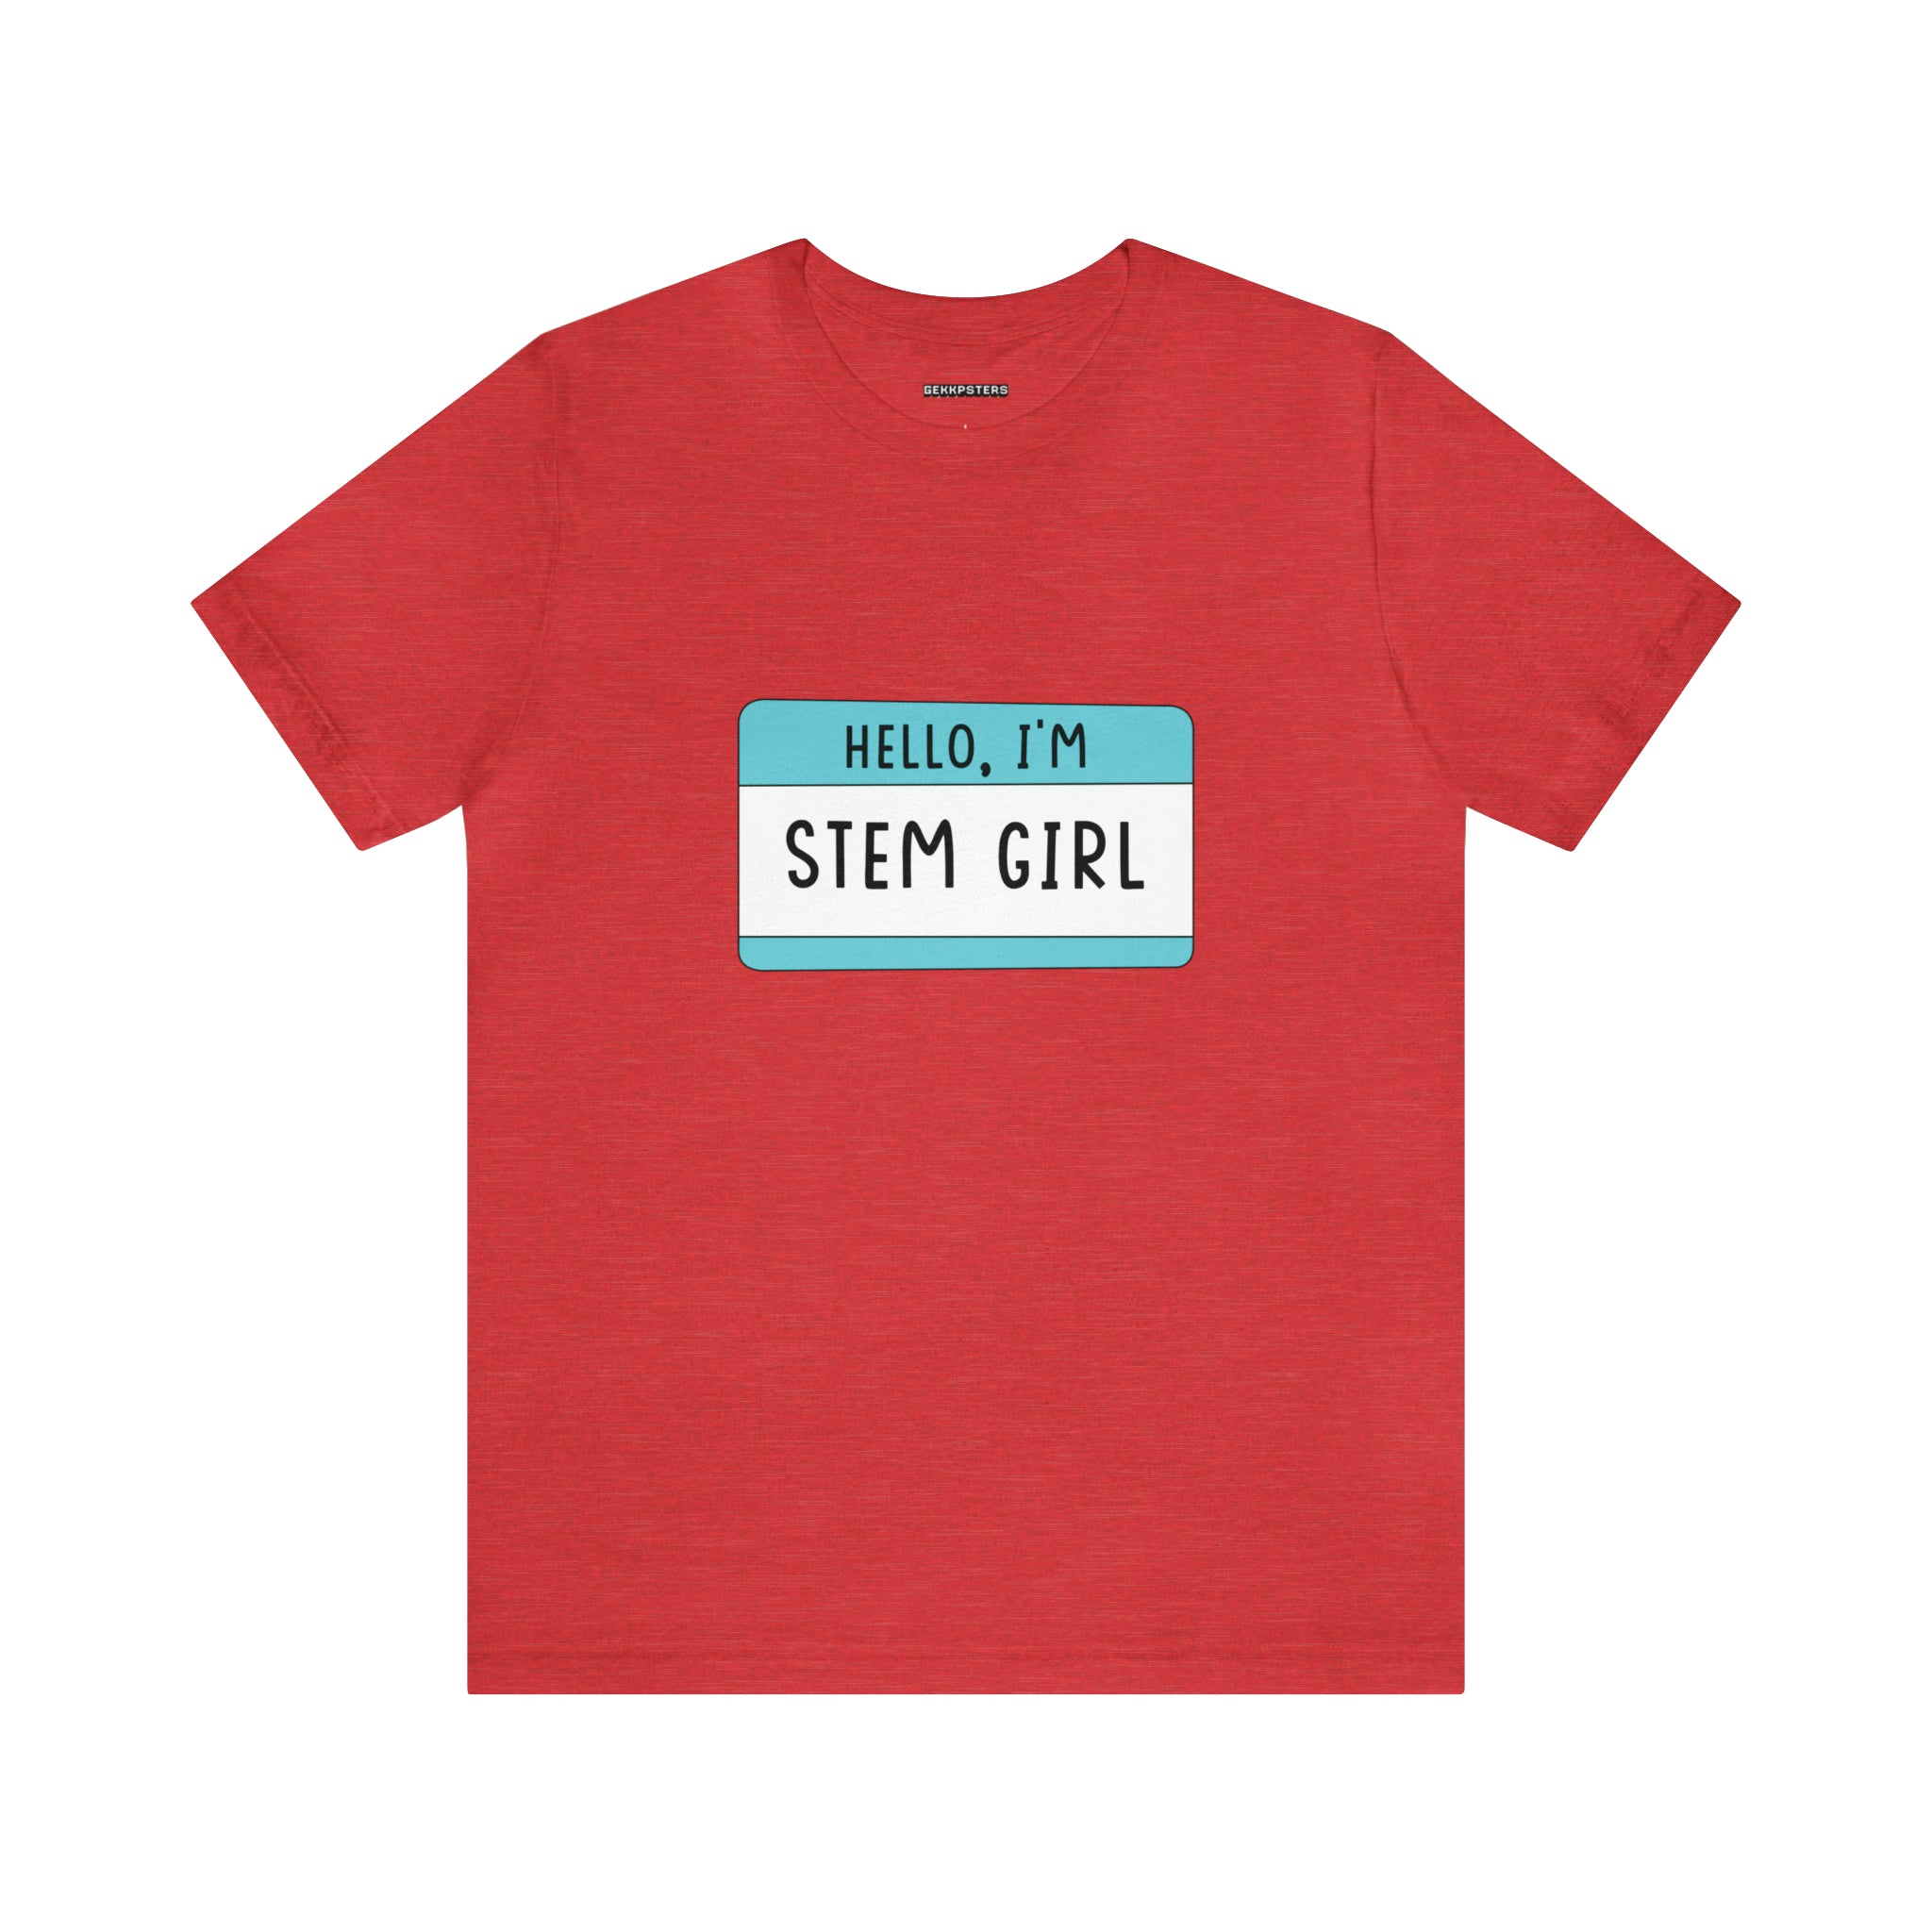 Hello, I'm Stem Girl T-Shirt with a nametag design on the chest, designed to inspire curiosity in young minds.